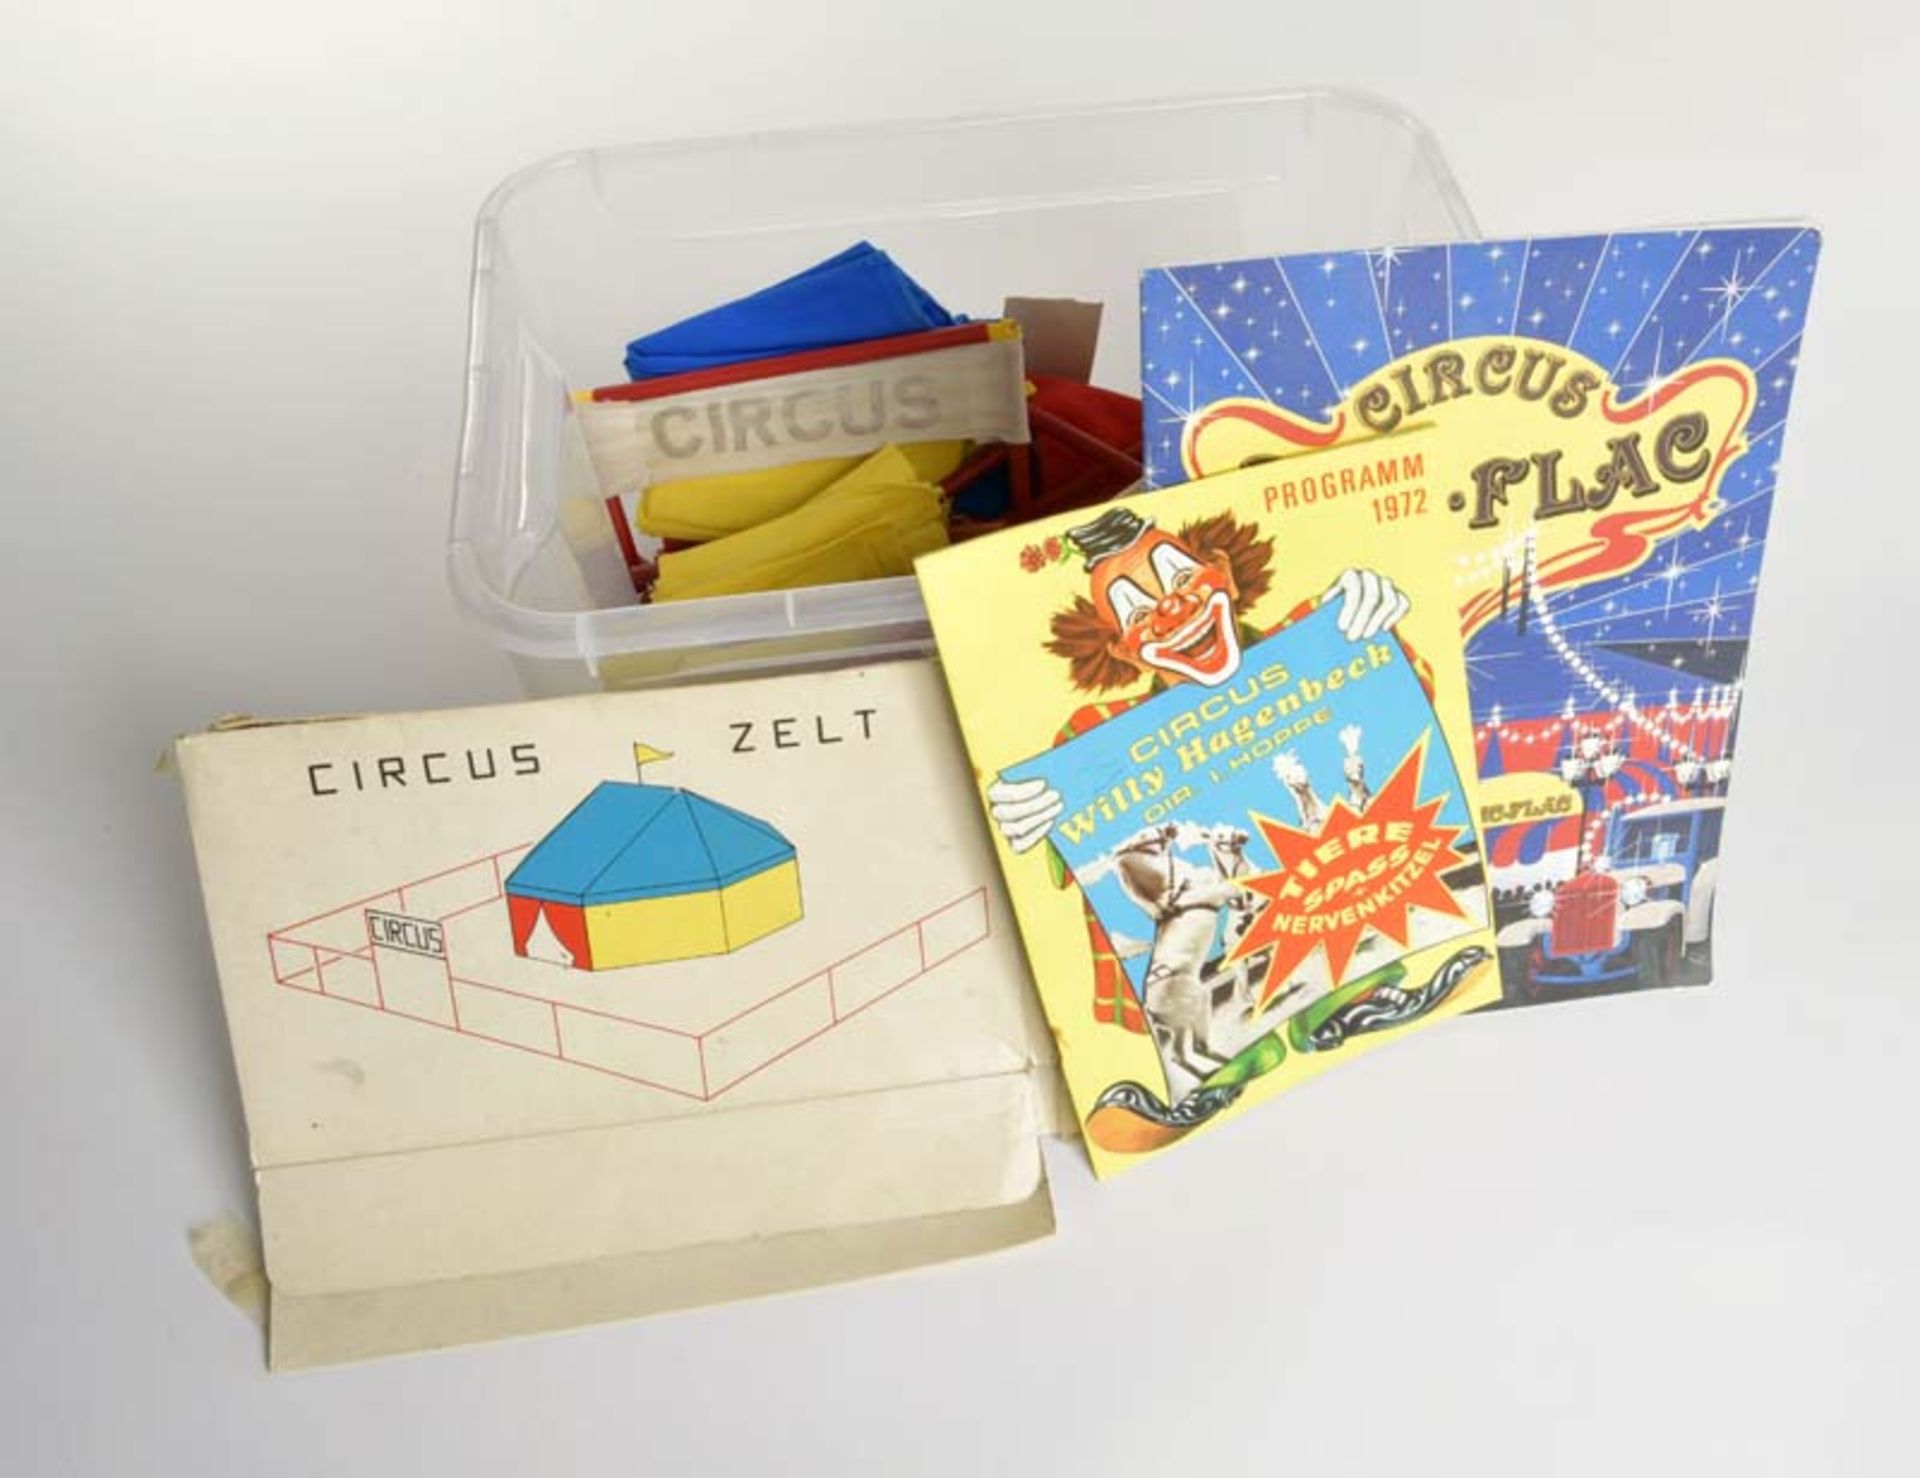 Vedes, Circus Tent + Circus Catalogues, W.-Germany, plastic, consistent with Corgi Toys Chipperfield